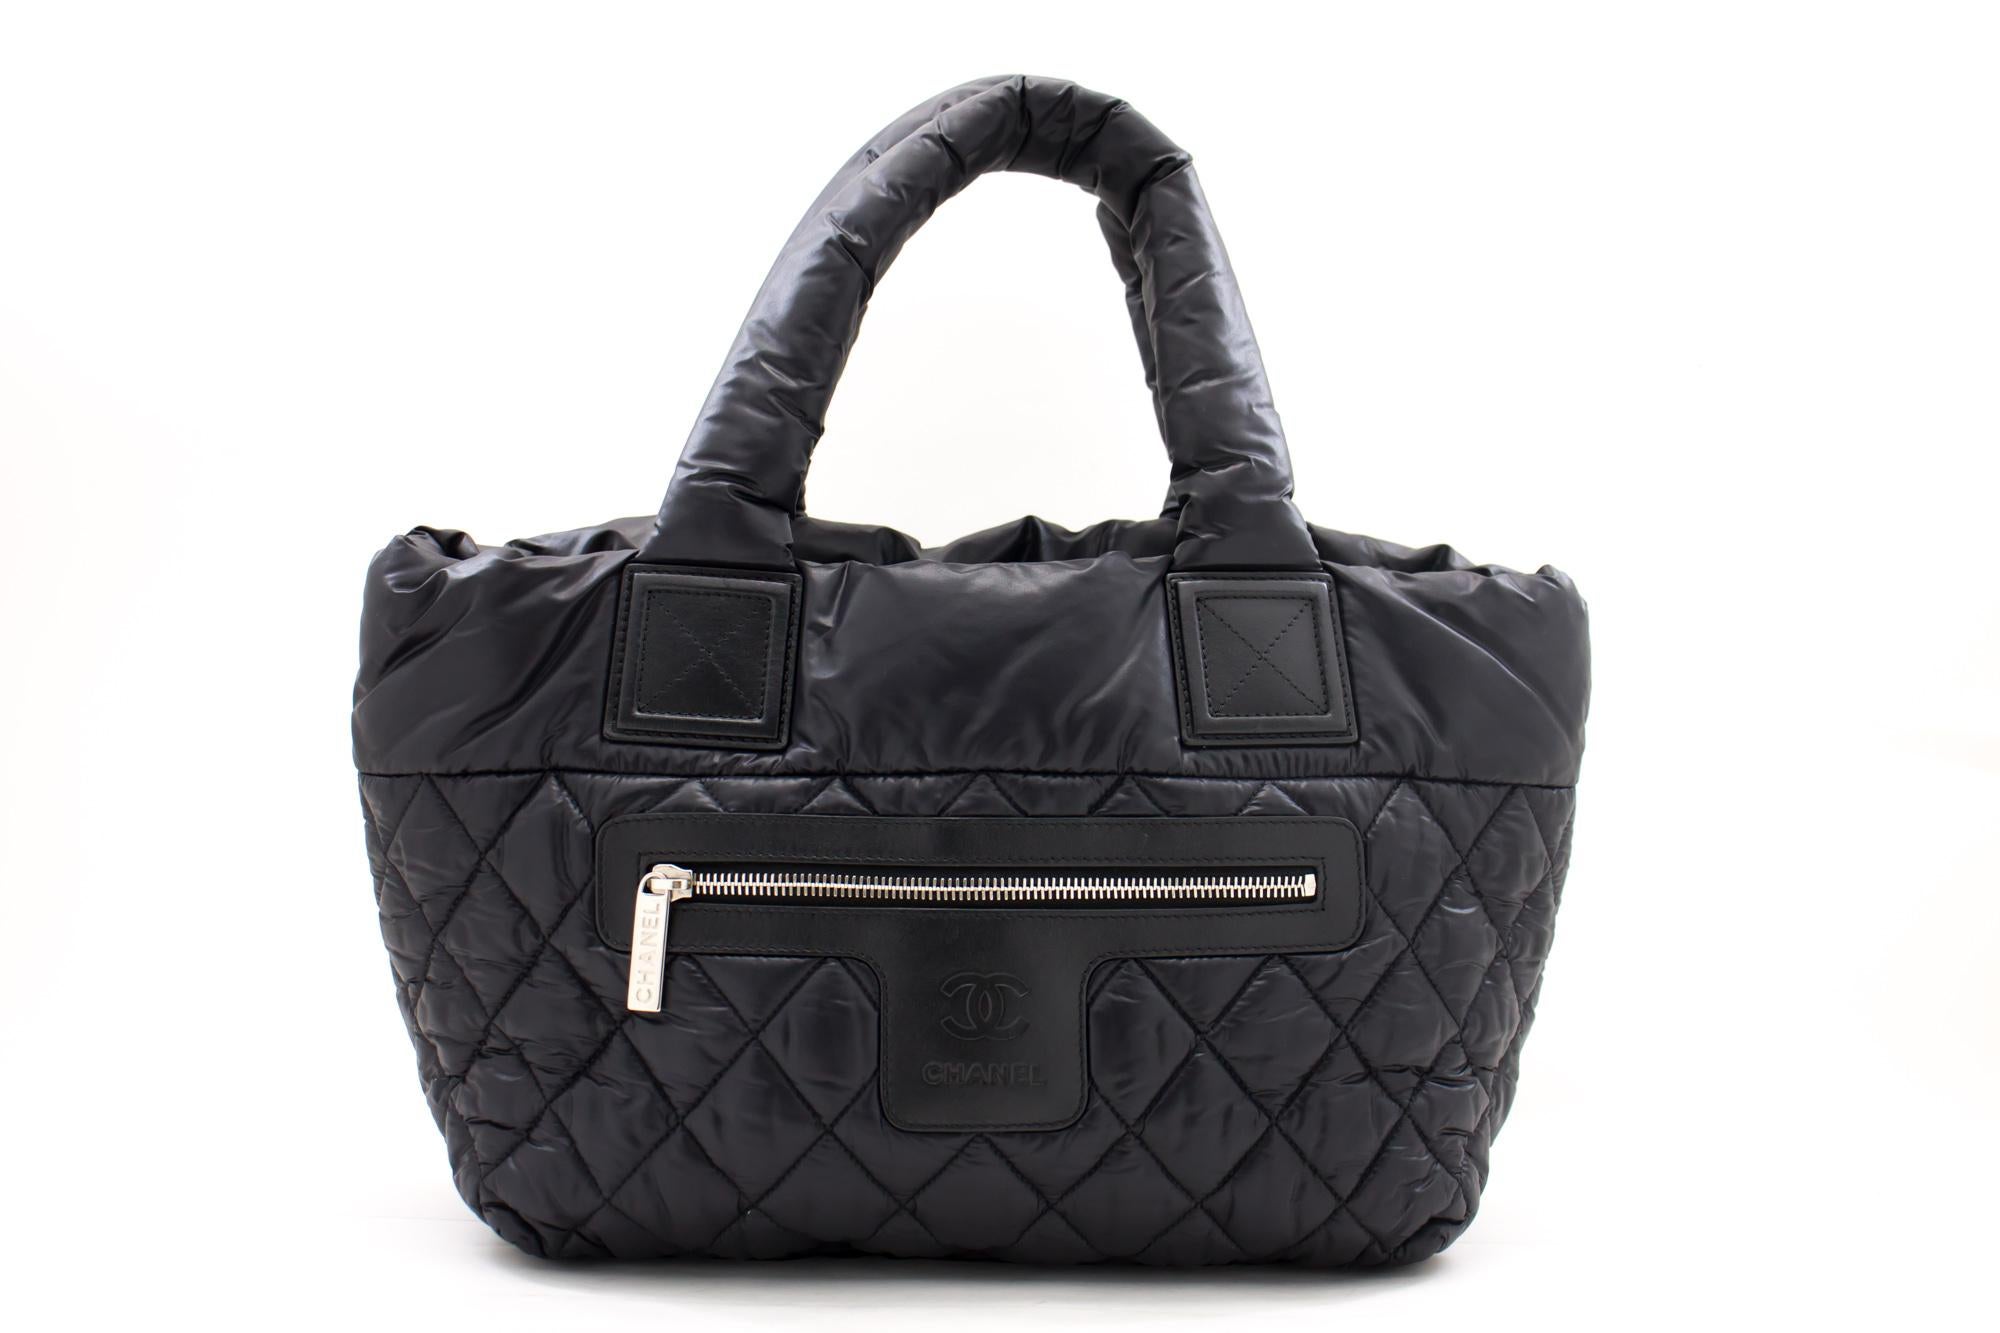 An authentic CHANEL Coco Cocoon PM Nylon Tote Bag Handbag Black Leather. The color is Black. The outside material is Nylon. The pattern is Solid. This item is Contemporary. The year of manufacture would be 2012.
Conditions & Ratings
Outside